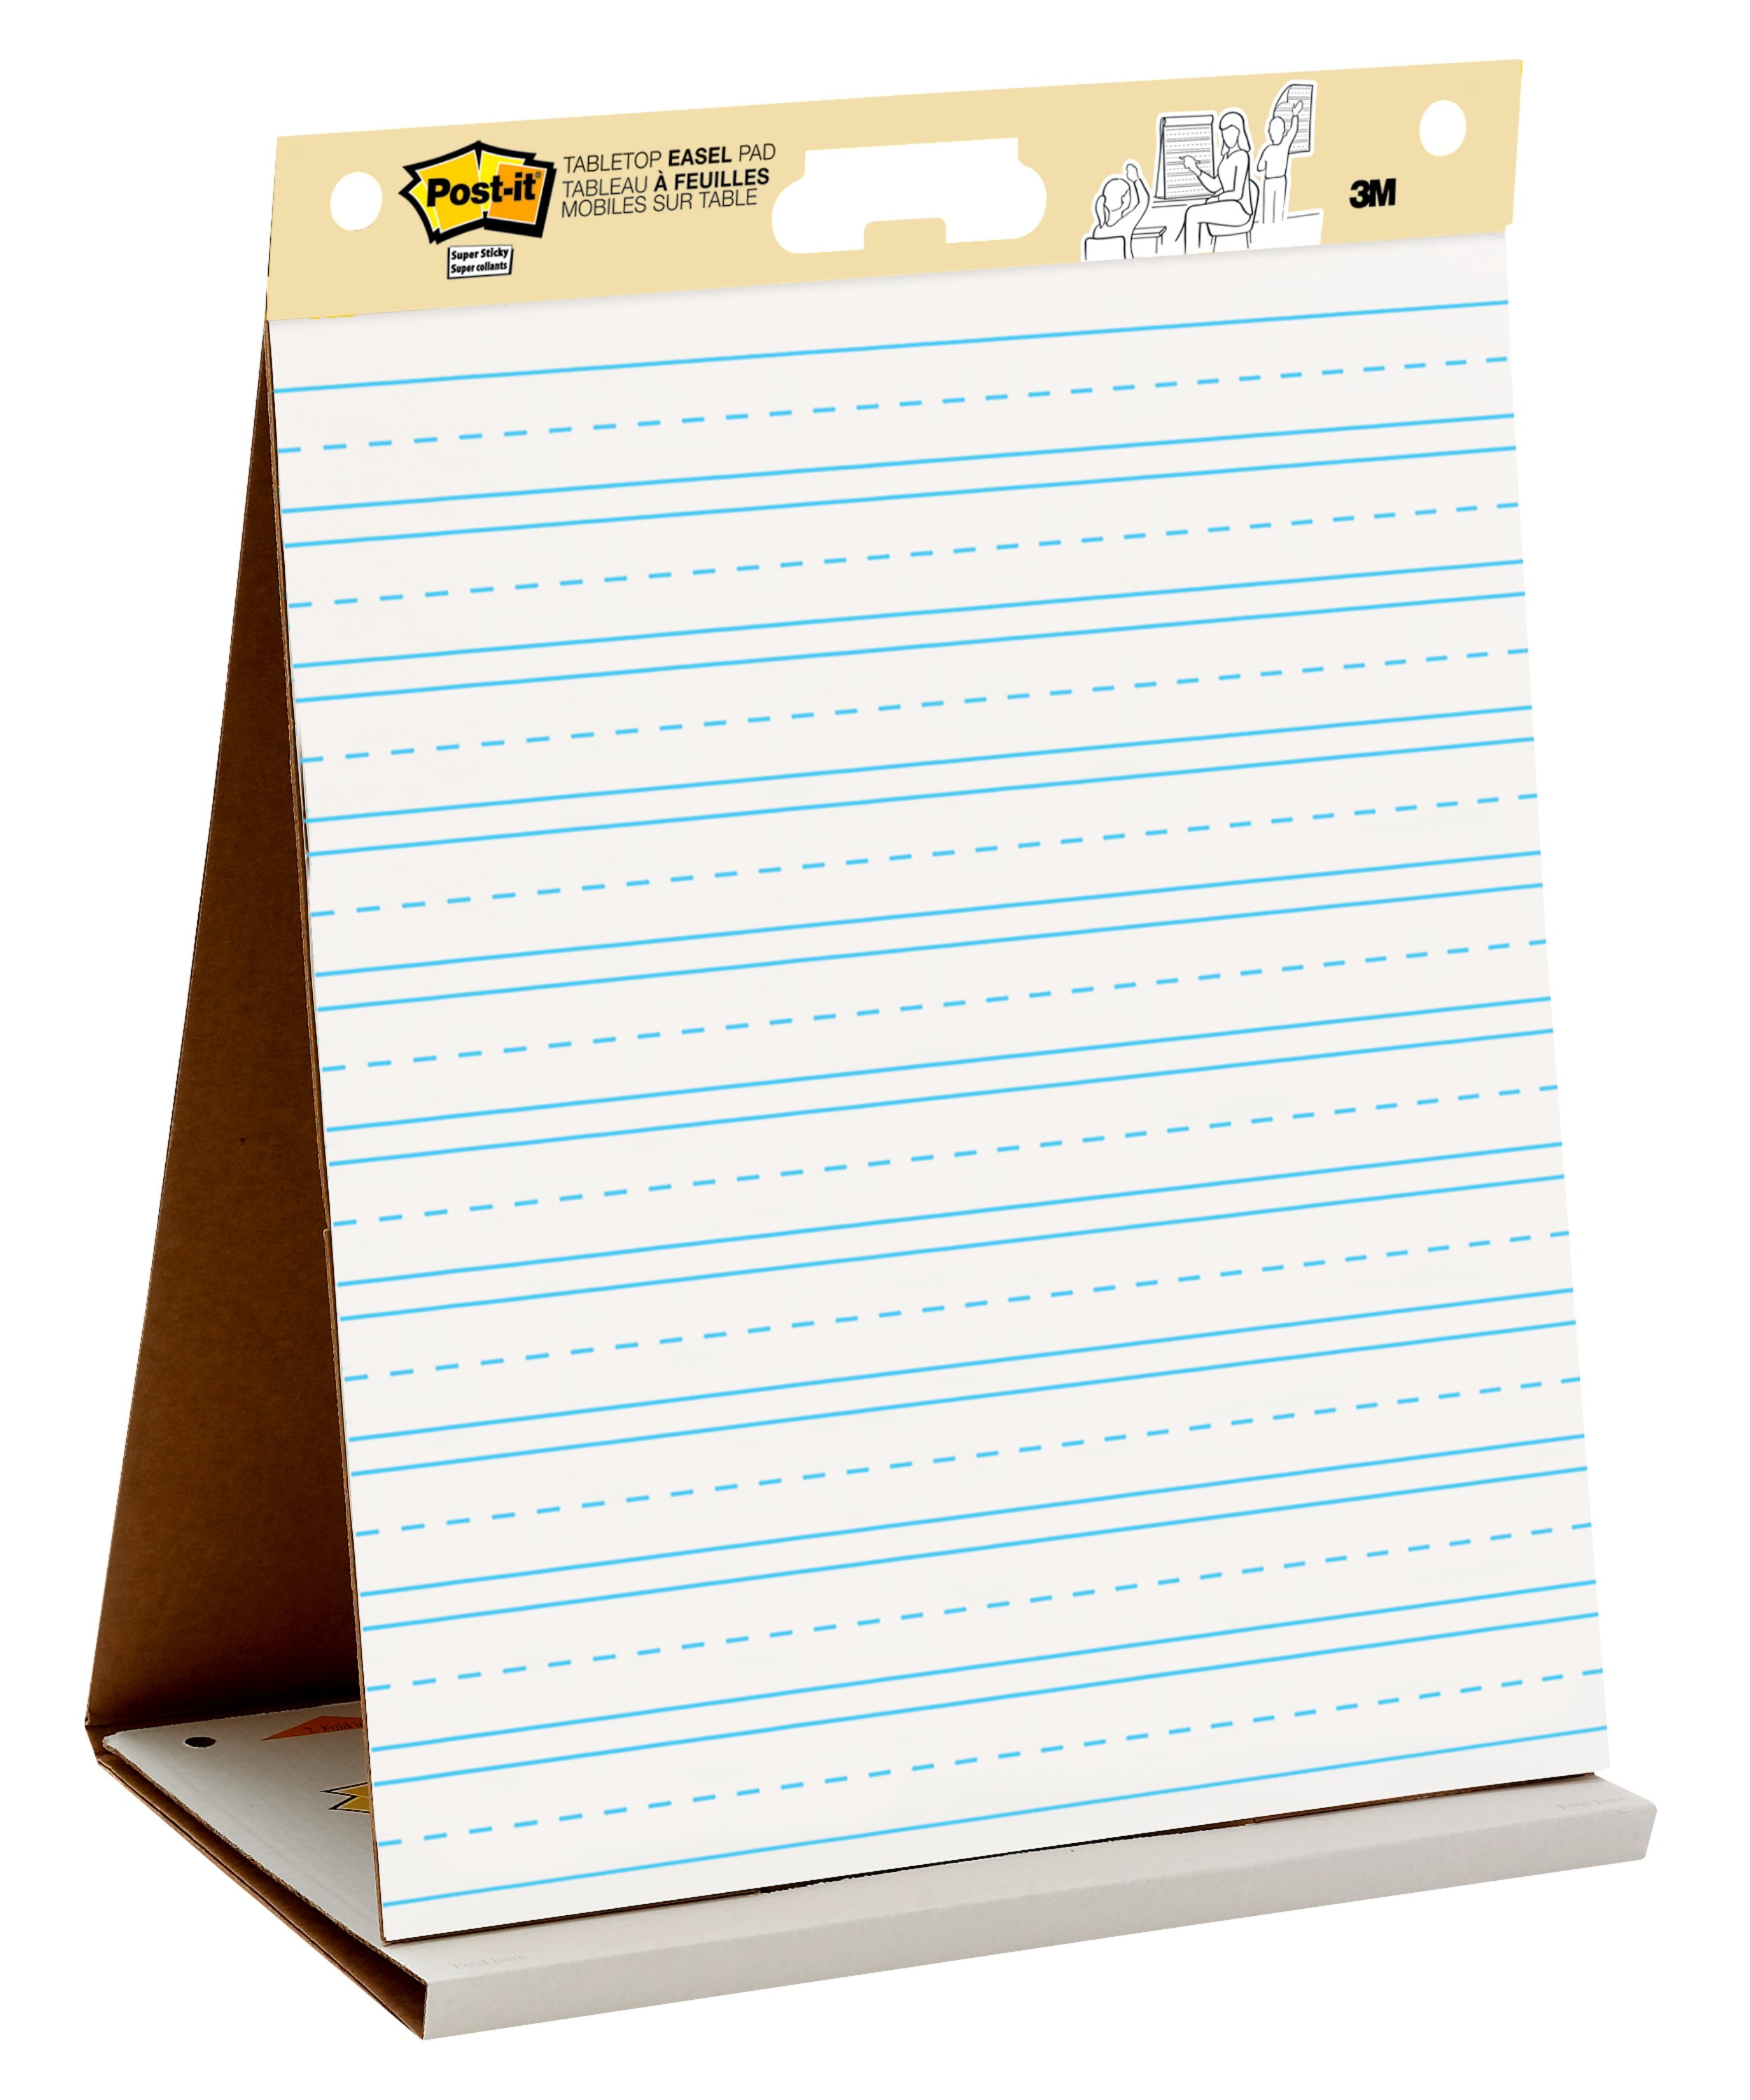 Post-it® Flip-Chart Pad - 30 Sheets - Plain - Stapled - 18.50 lb Basis  Weight - 25 x 30 - 35.80 x 25.2 x 1.8 - White Paper - Repositionable,  Bleed Resistant, Self-adhesive, Resist Bleed-through, Removable, Sturdy  Back, Cardboard Back - Recycled 